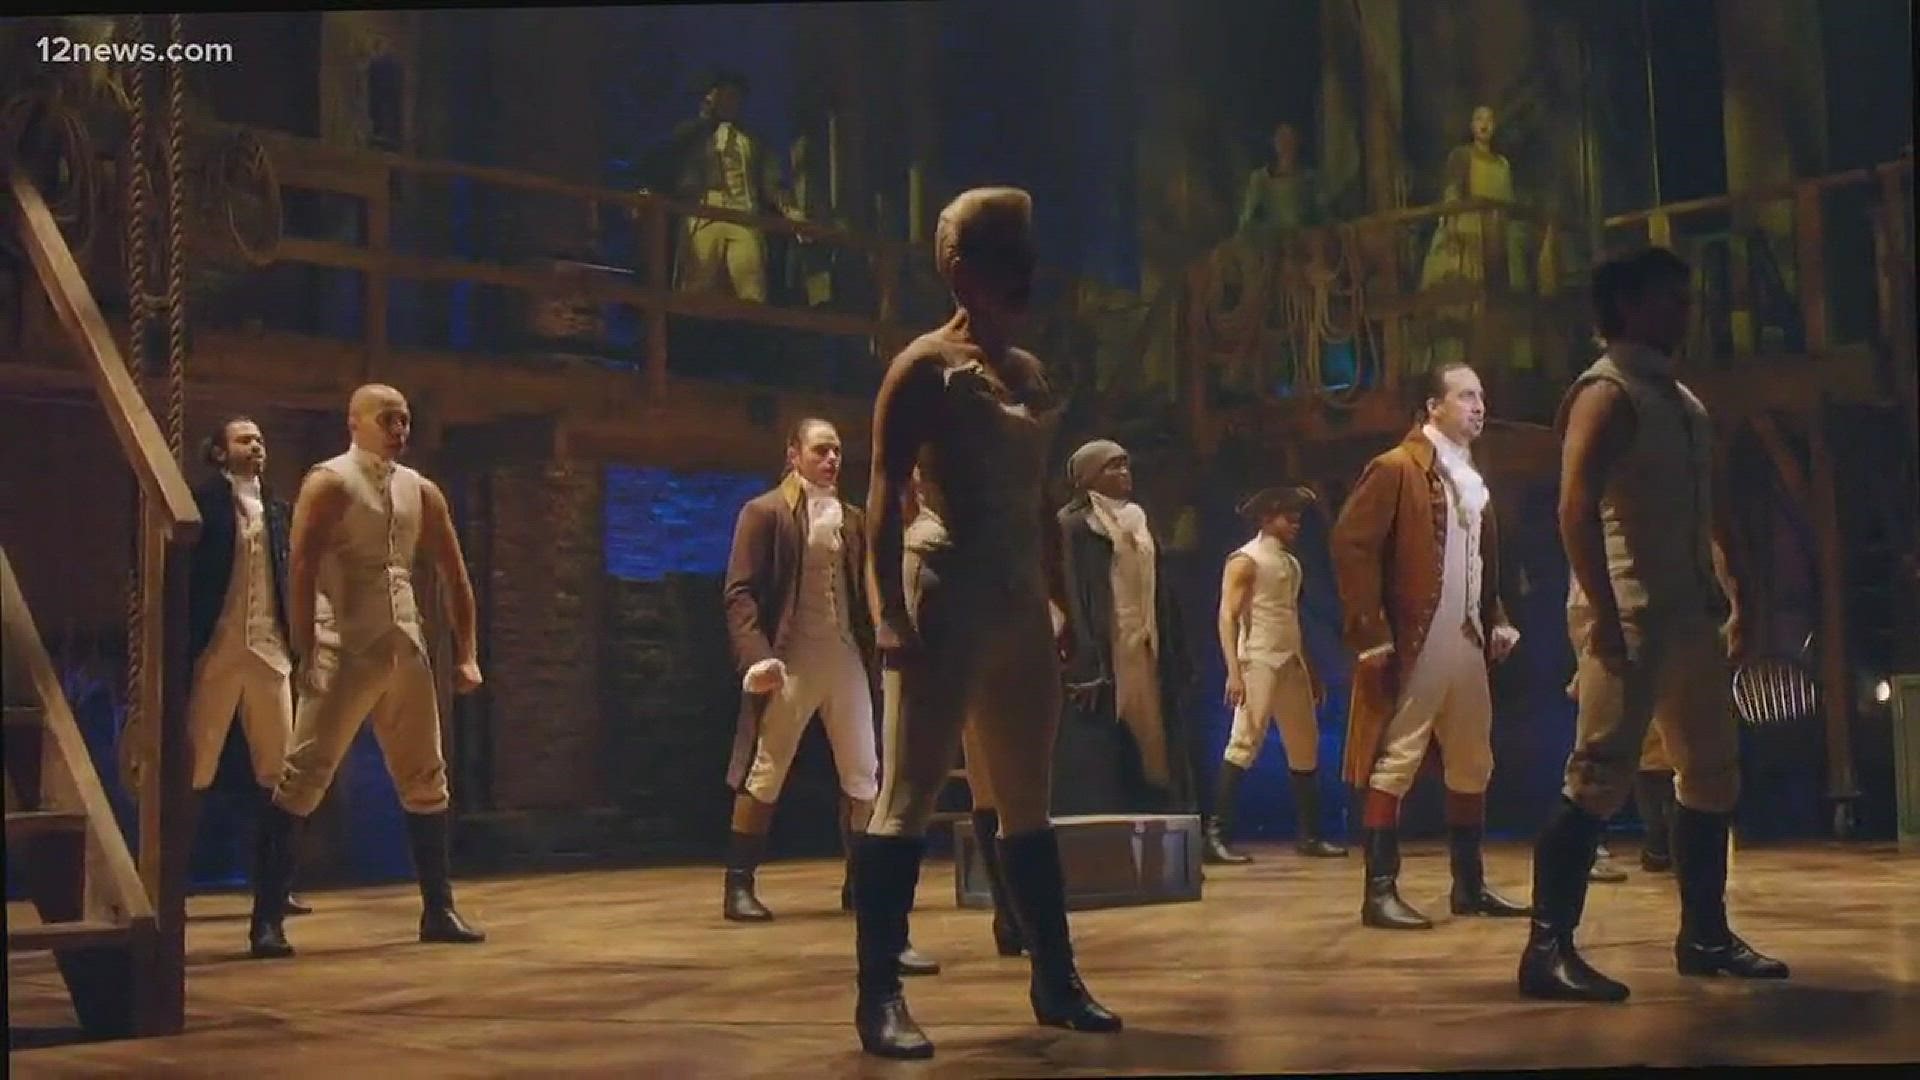 ASU Gammage announced a digital lottery for "Hamilton" tickets for patrons who enter for a chance to win using the "Hamilton" app.